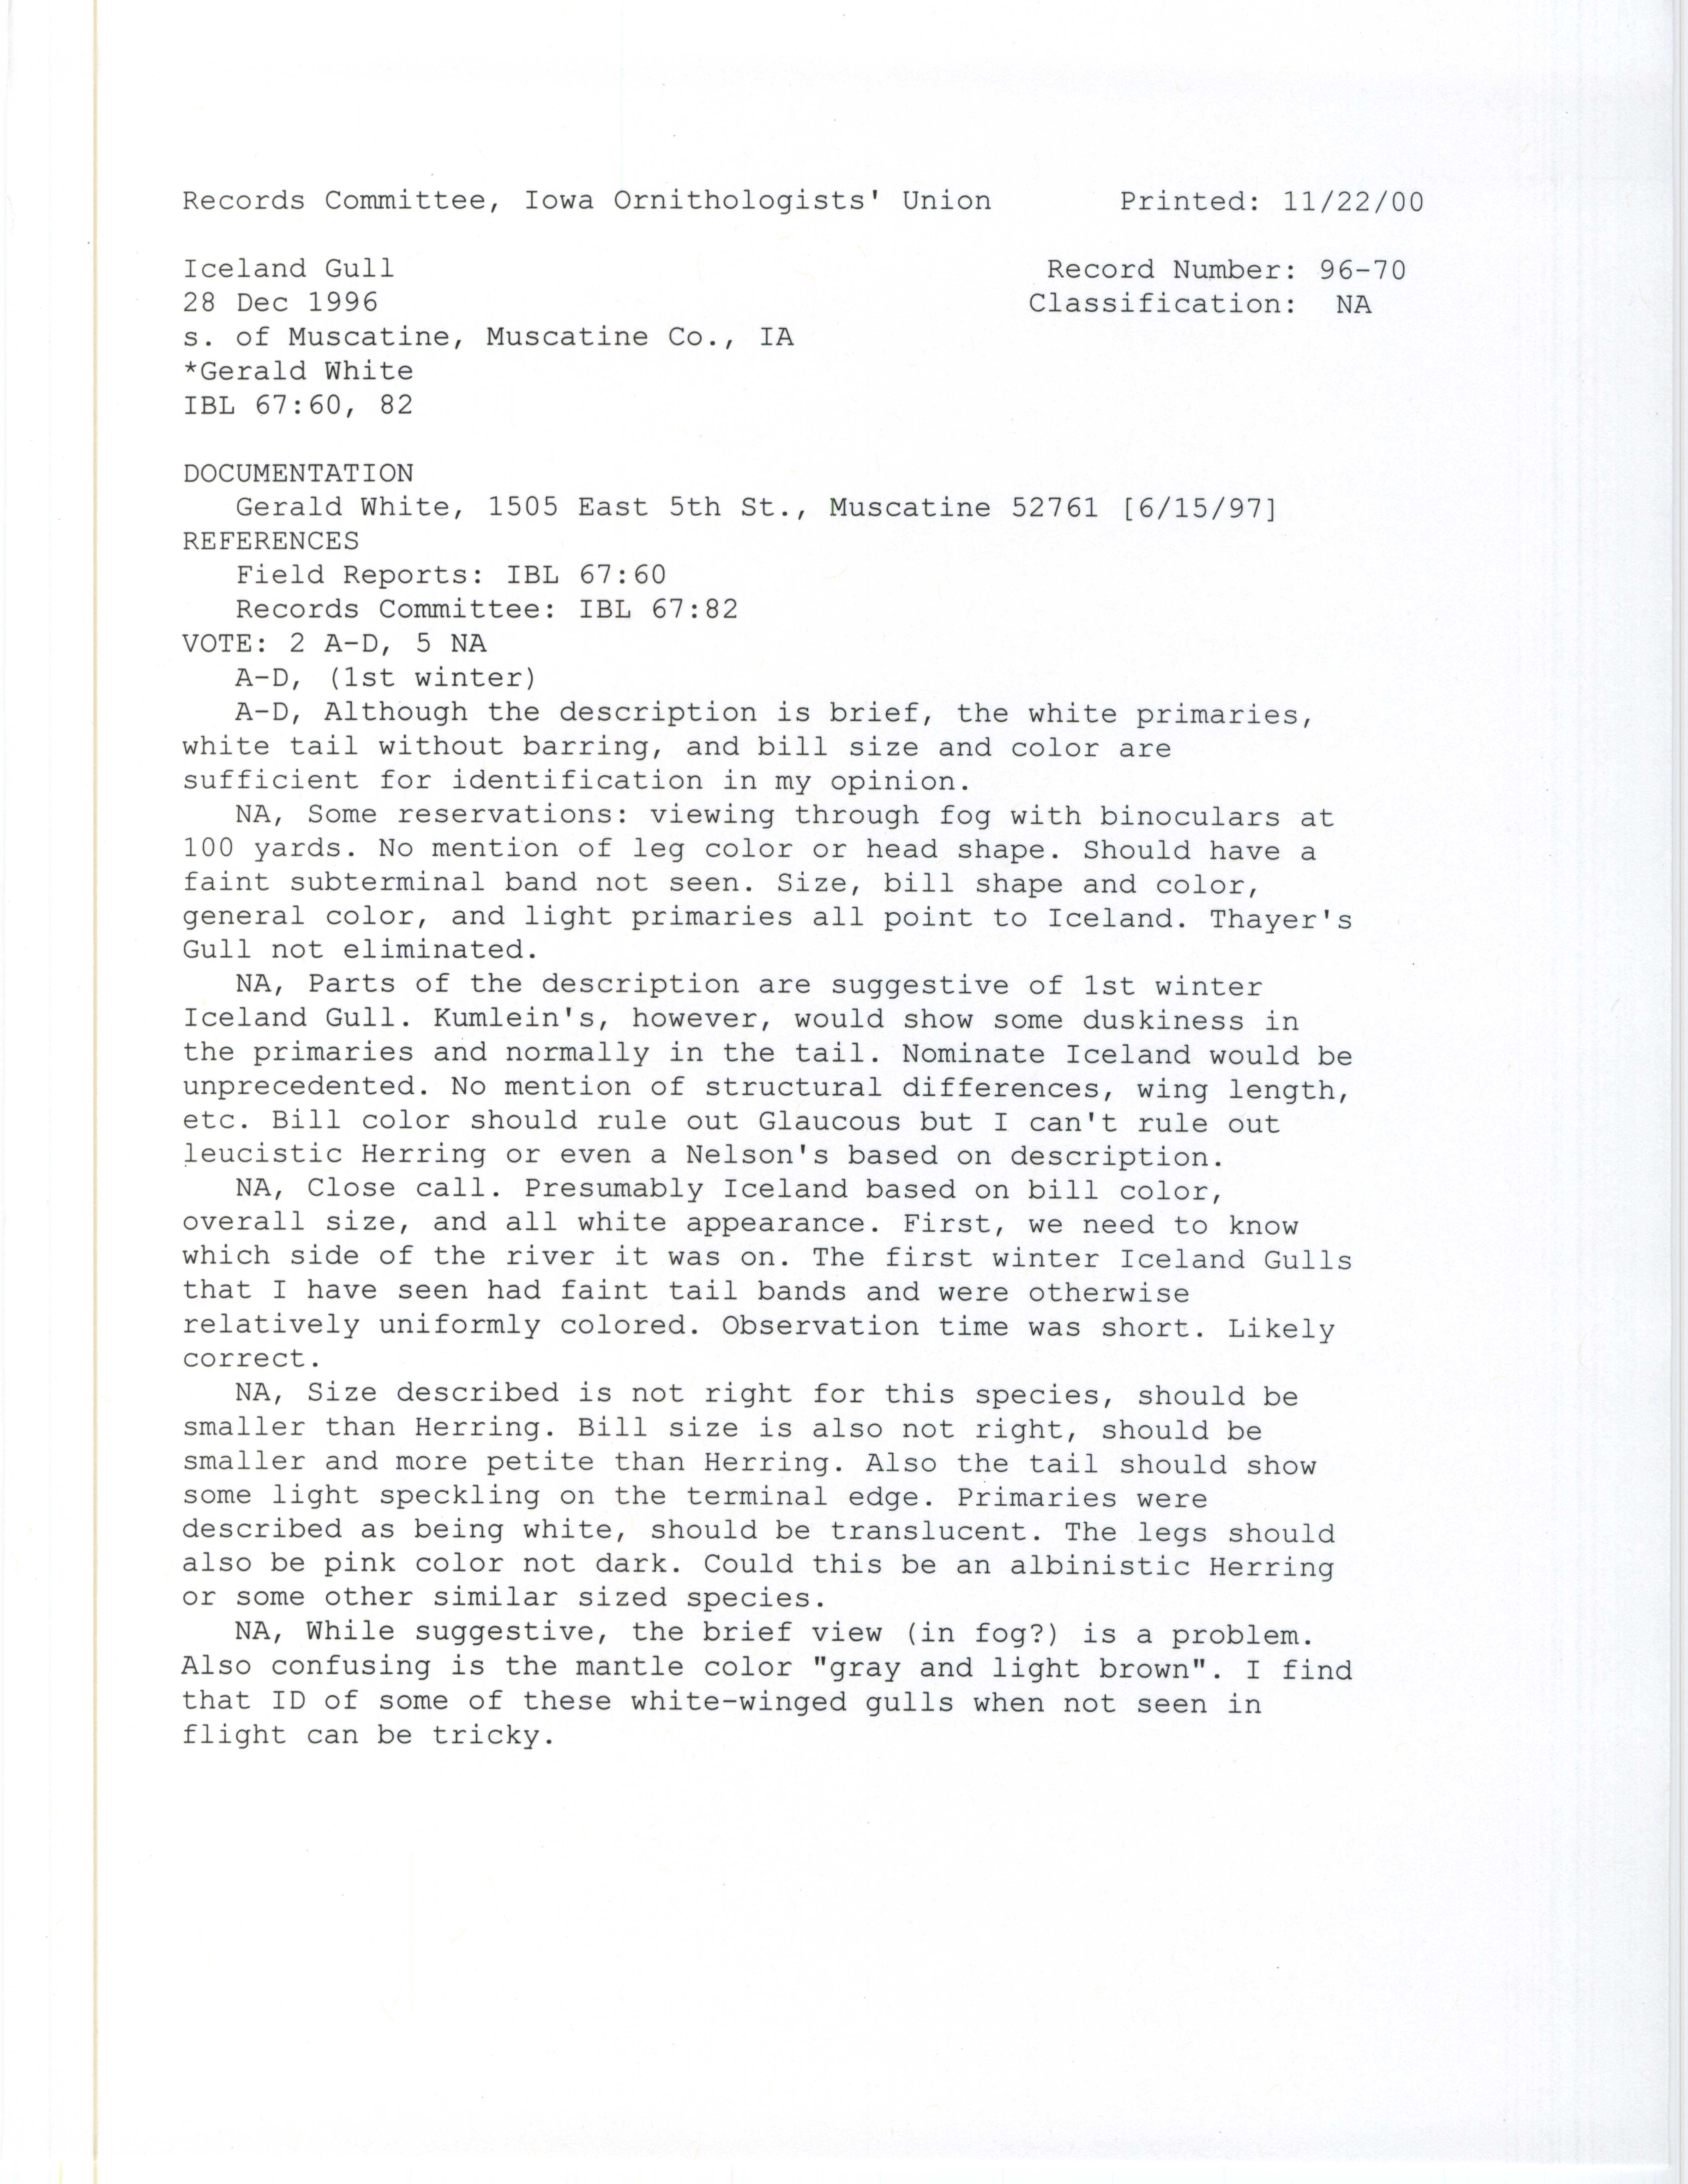 Records Committee review for rare bird sighting of Iceland Gull south of Muscatine, 1996